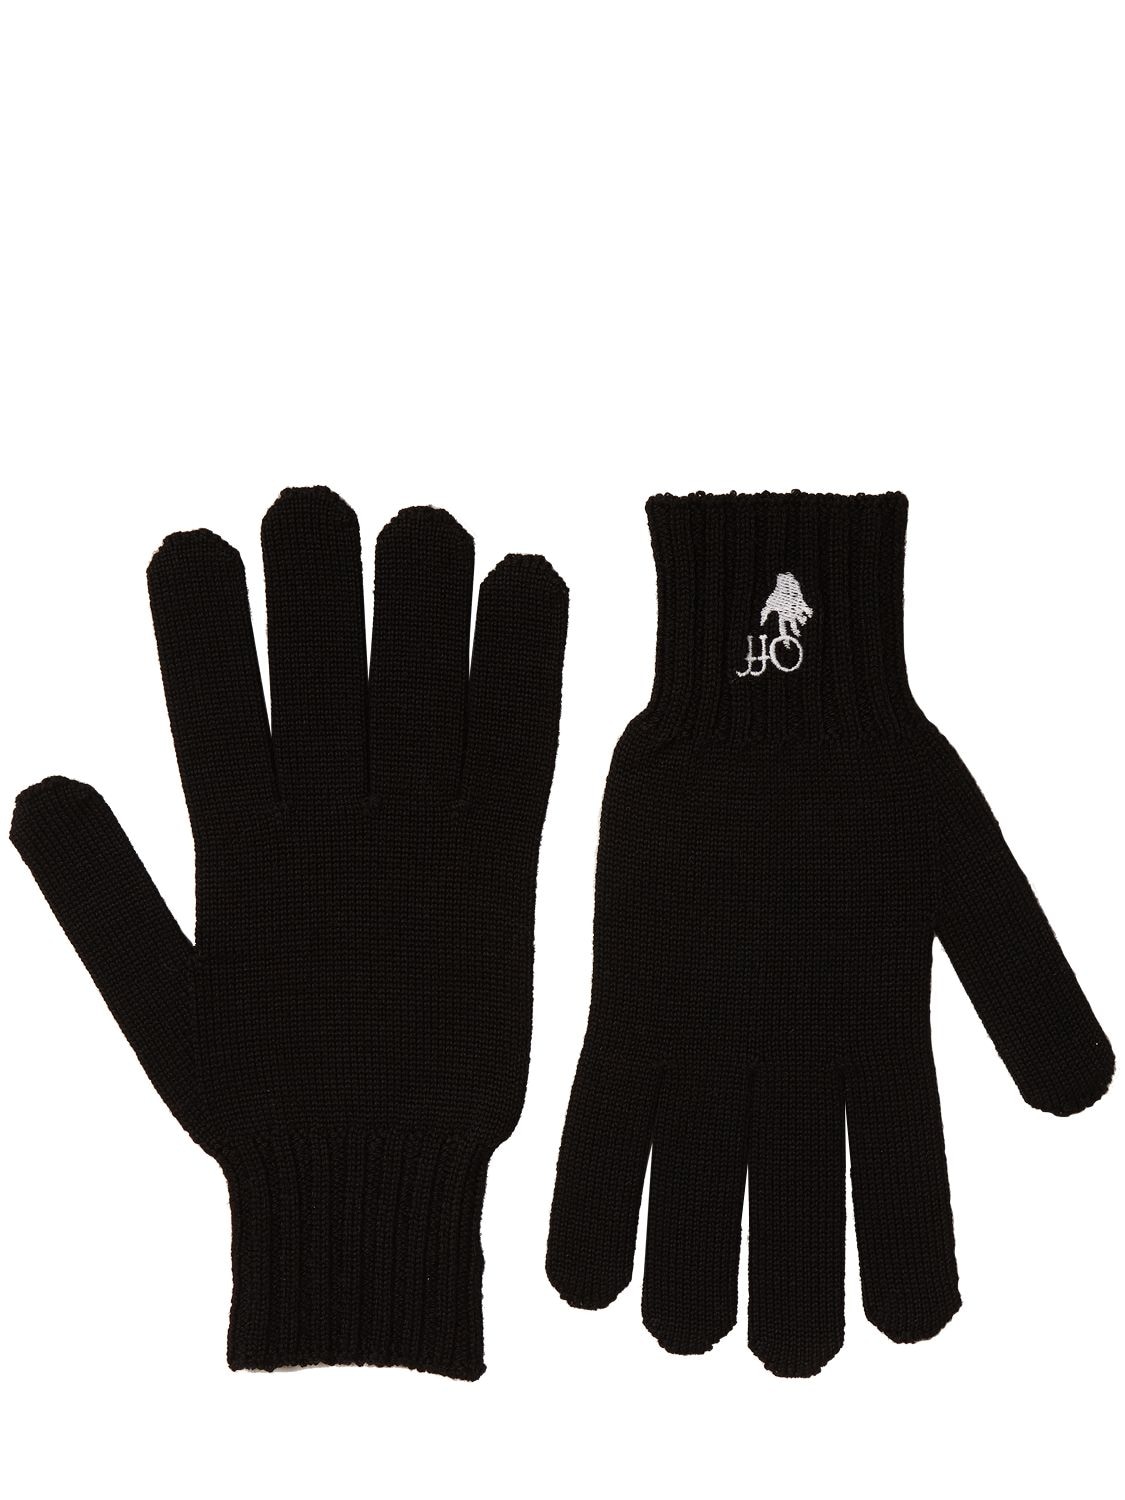 OFF-WHITE HAND OFF EMBROIDERED WOOL GLOVES,74IJS5004-MTAWMQ2